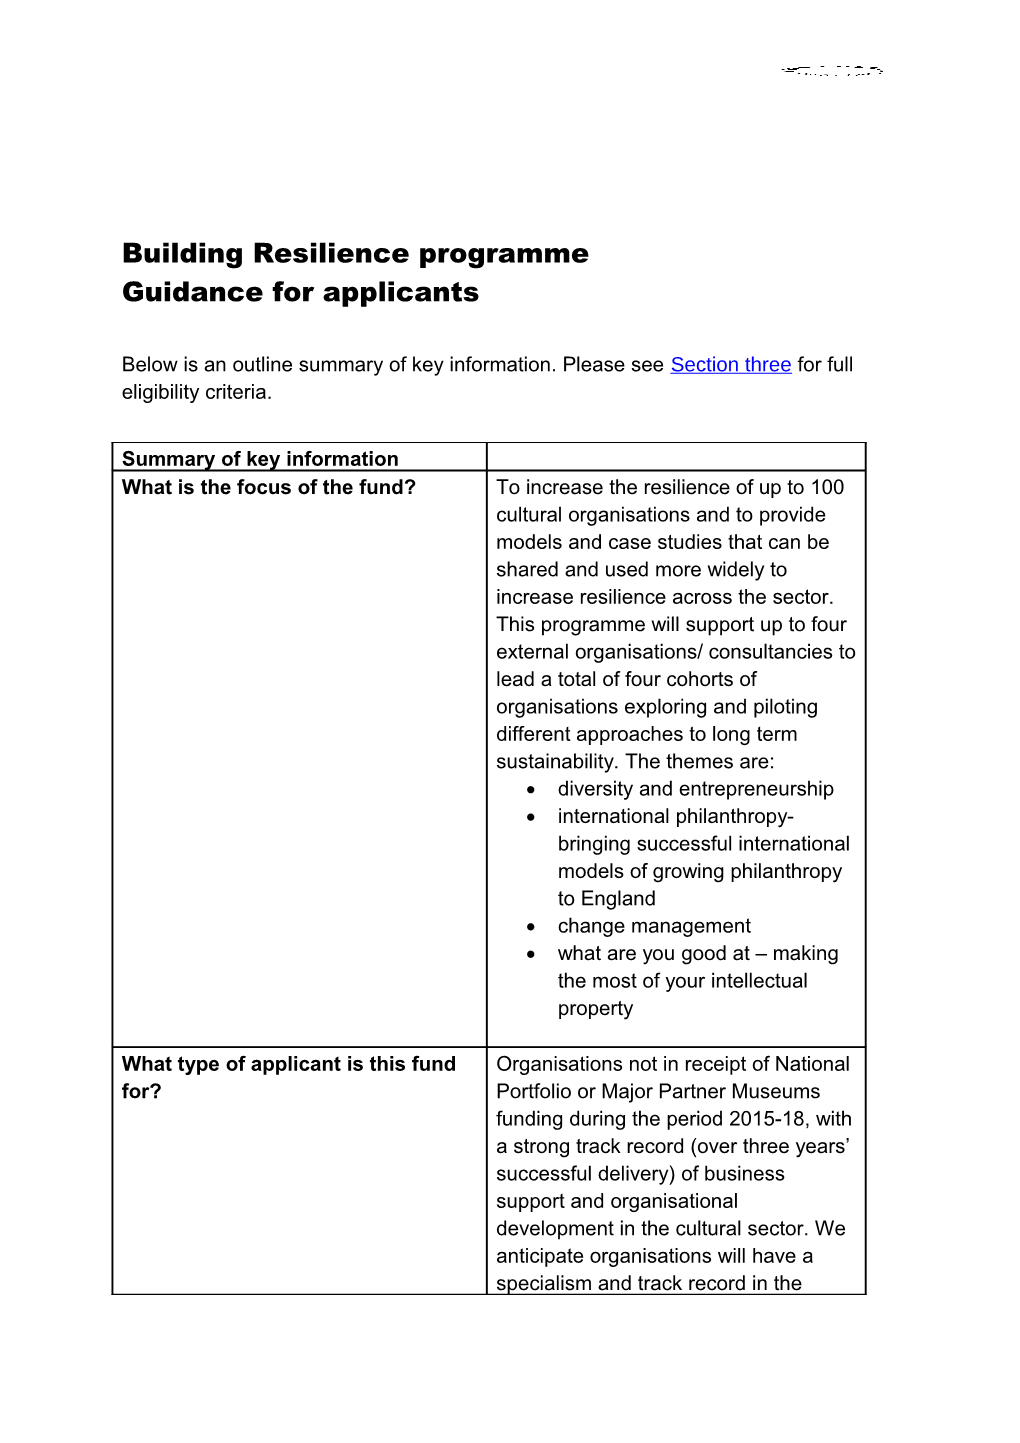 Building Resilience Programme